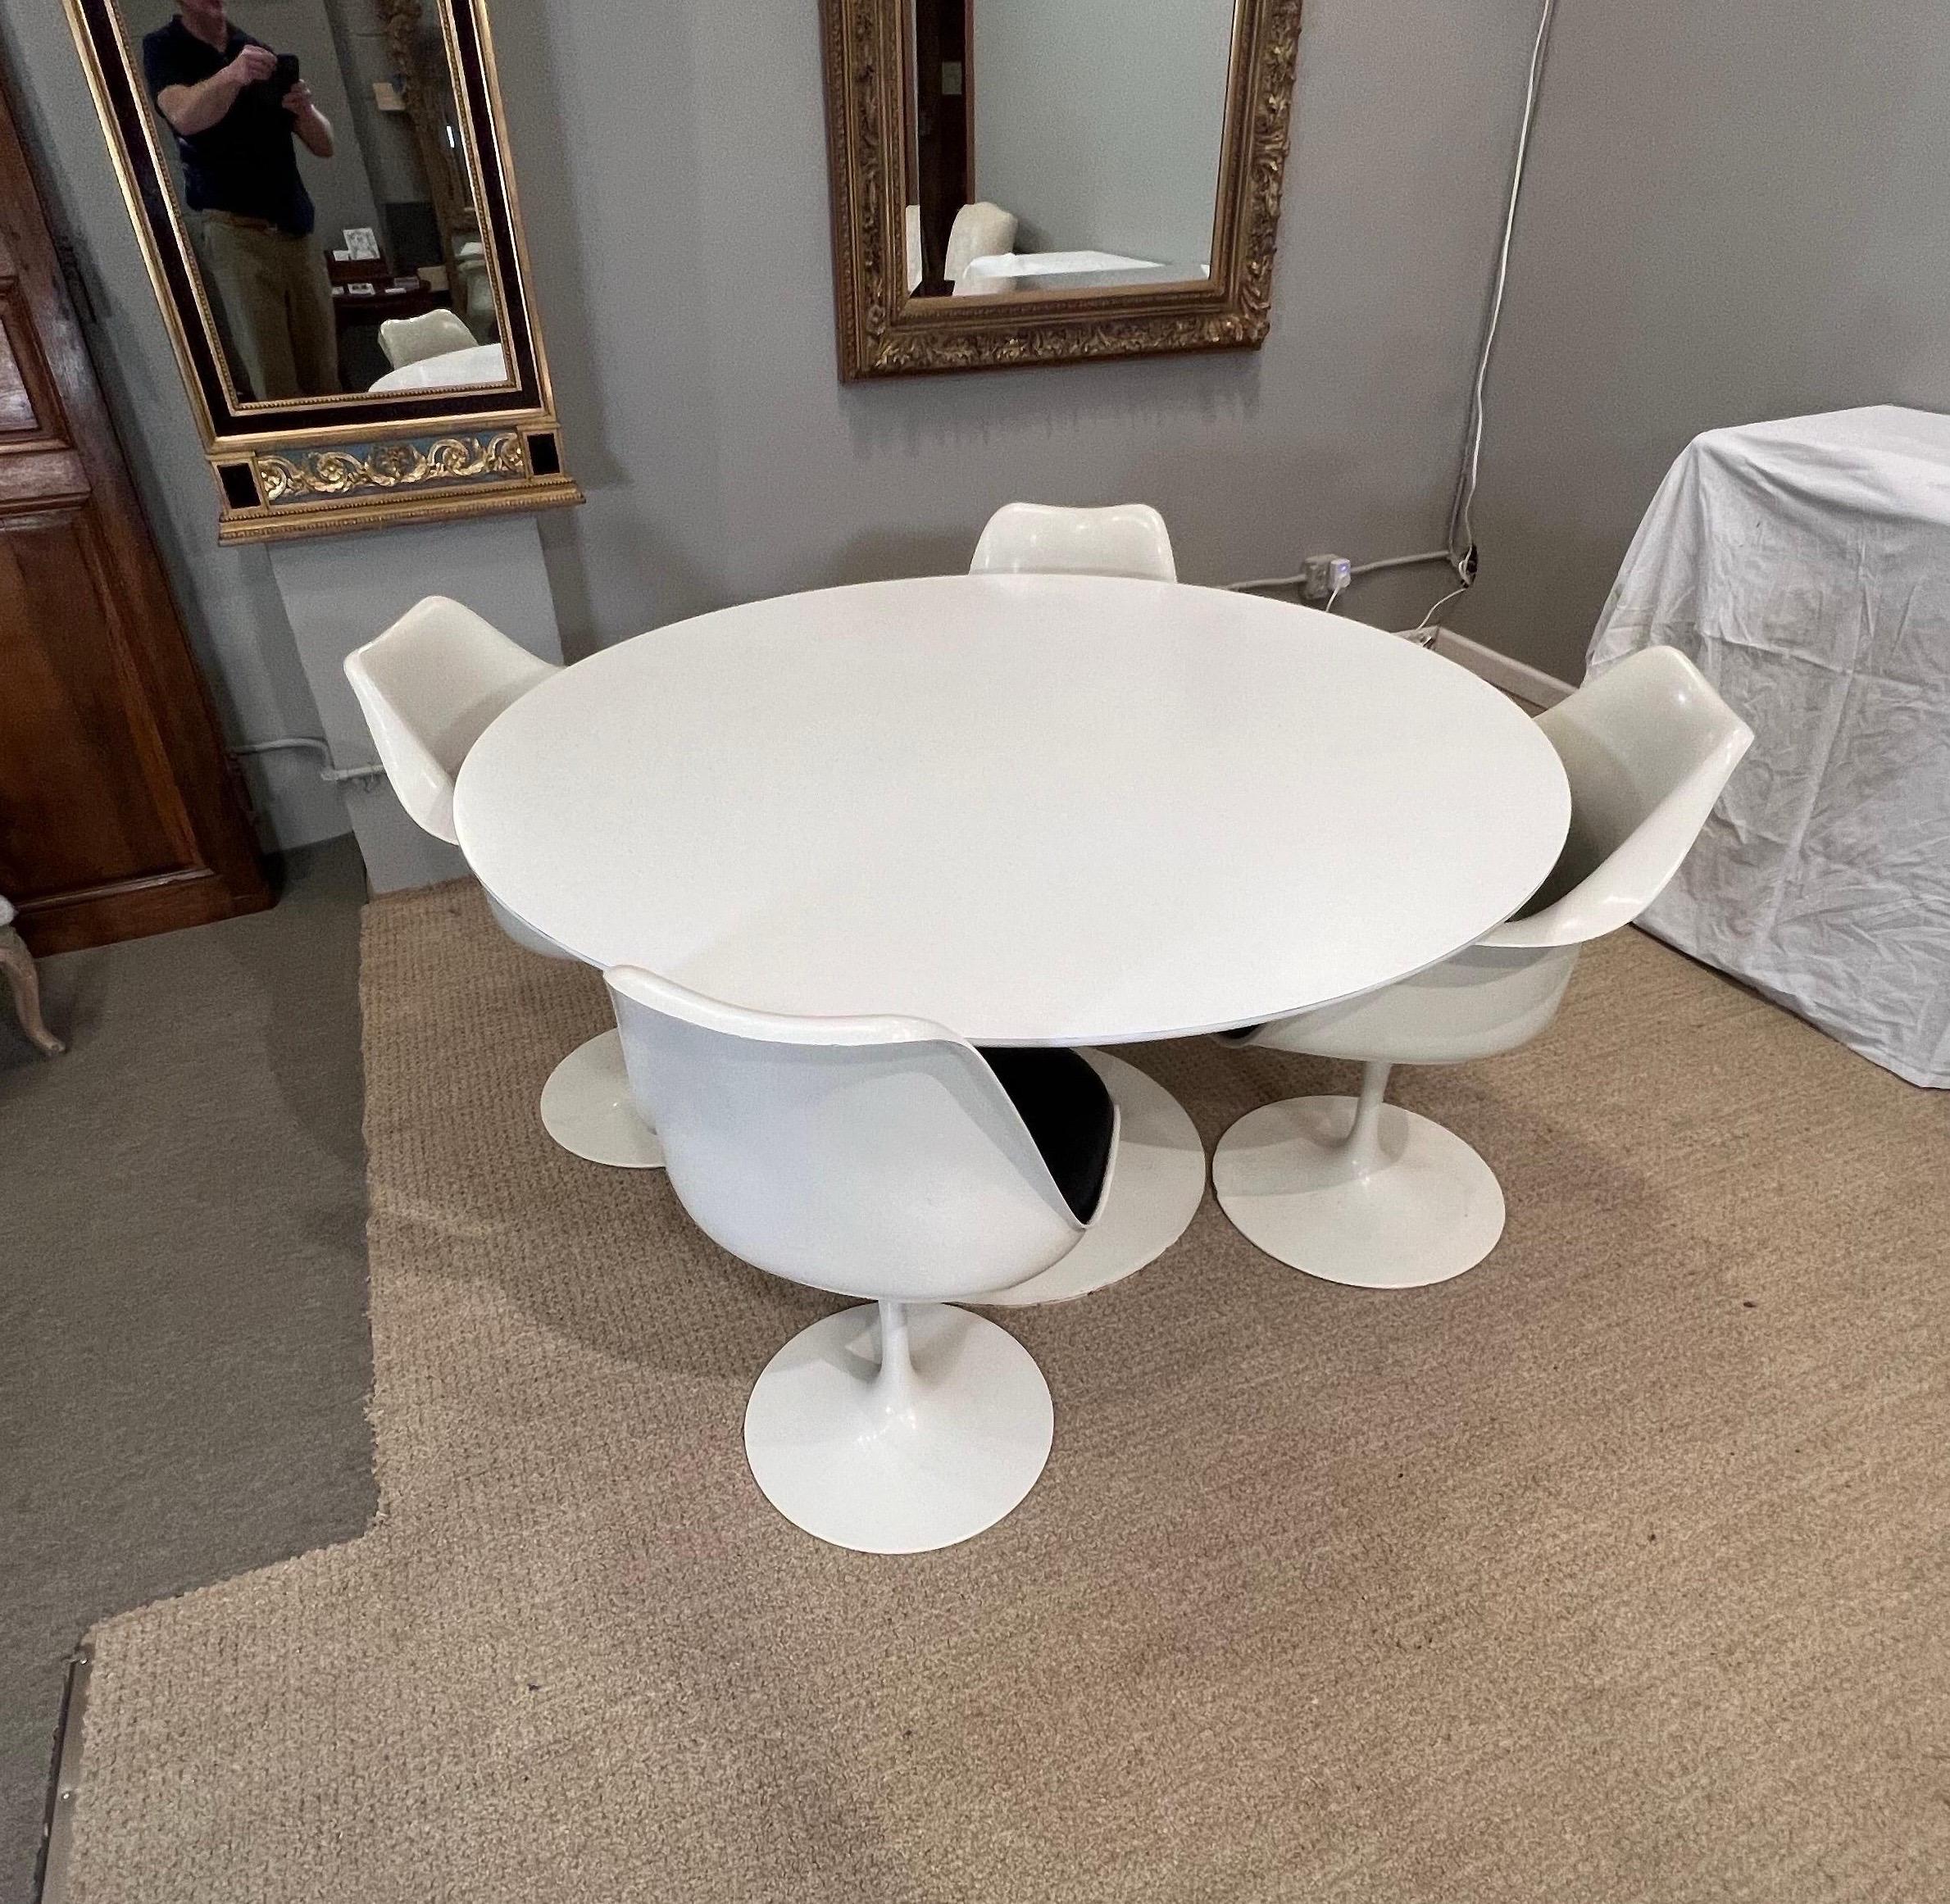 1970’s Tulip form Table & 4 Chairs, Eero Saarinen for Knoll, 
circa 1970, A stylish and iconic design, this tulip dining table and four matching swivel dining chairs were designed by Eero Saarinen for Knoll in the 1950’s.  This example is made by